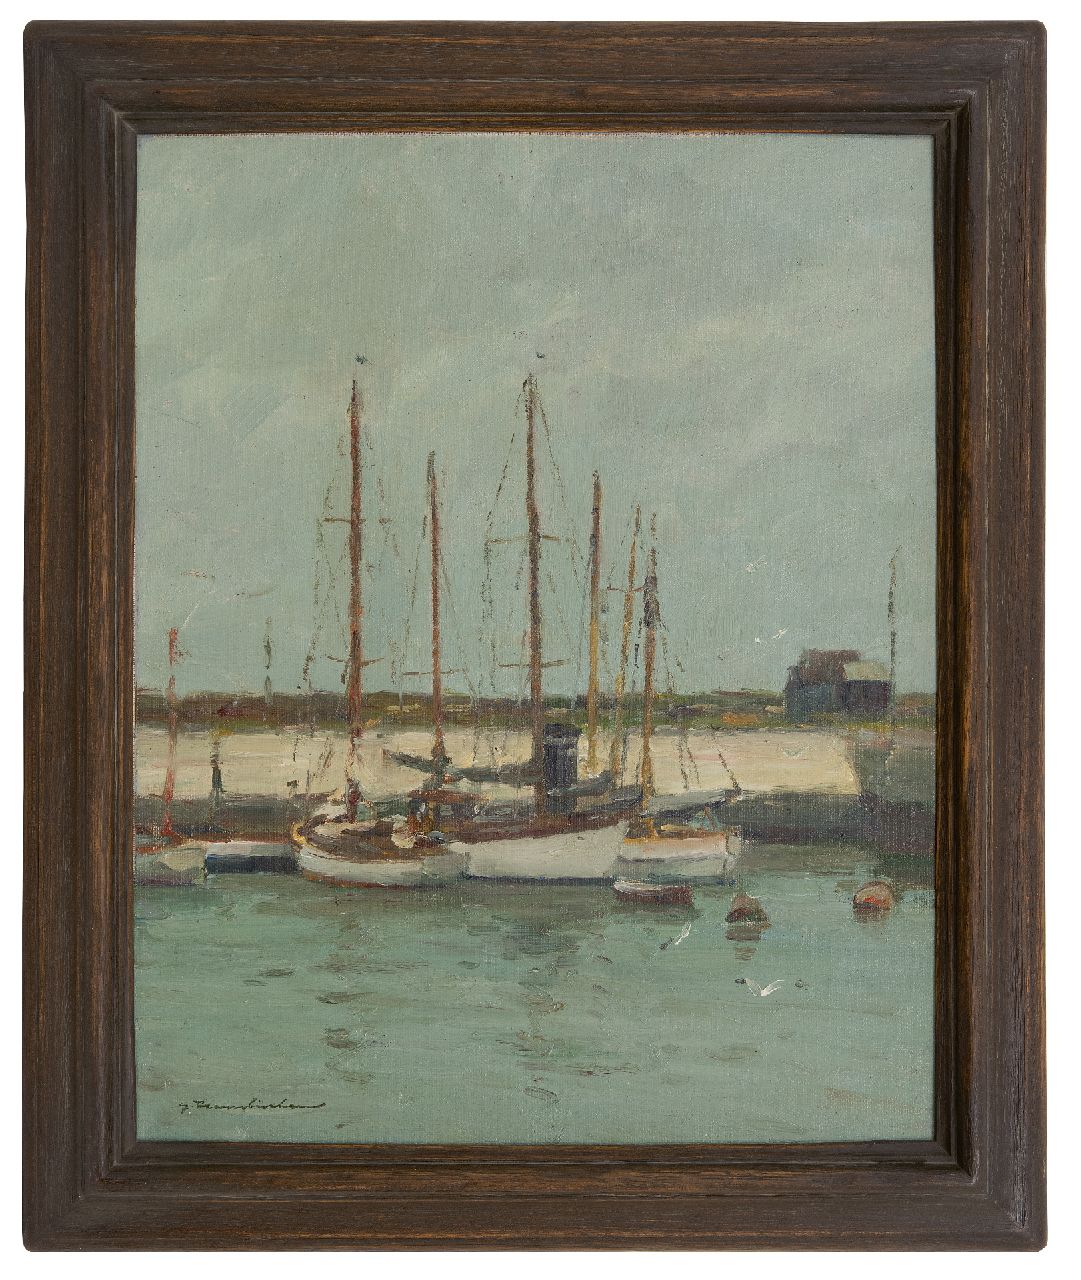 Hambüchen G.  | Georg Hambüchen | Paintings offered for sale | White boats, oil on canvas 50.3 x 40.2 cm, signed l.l.